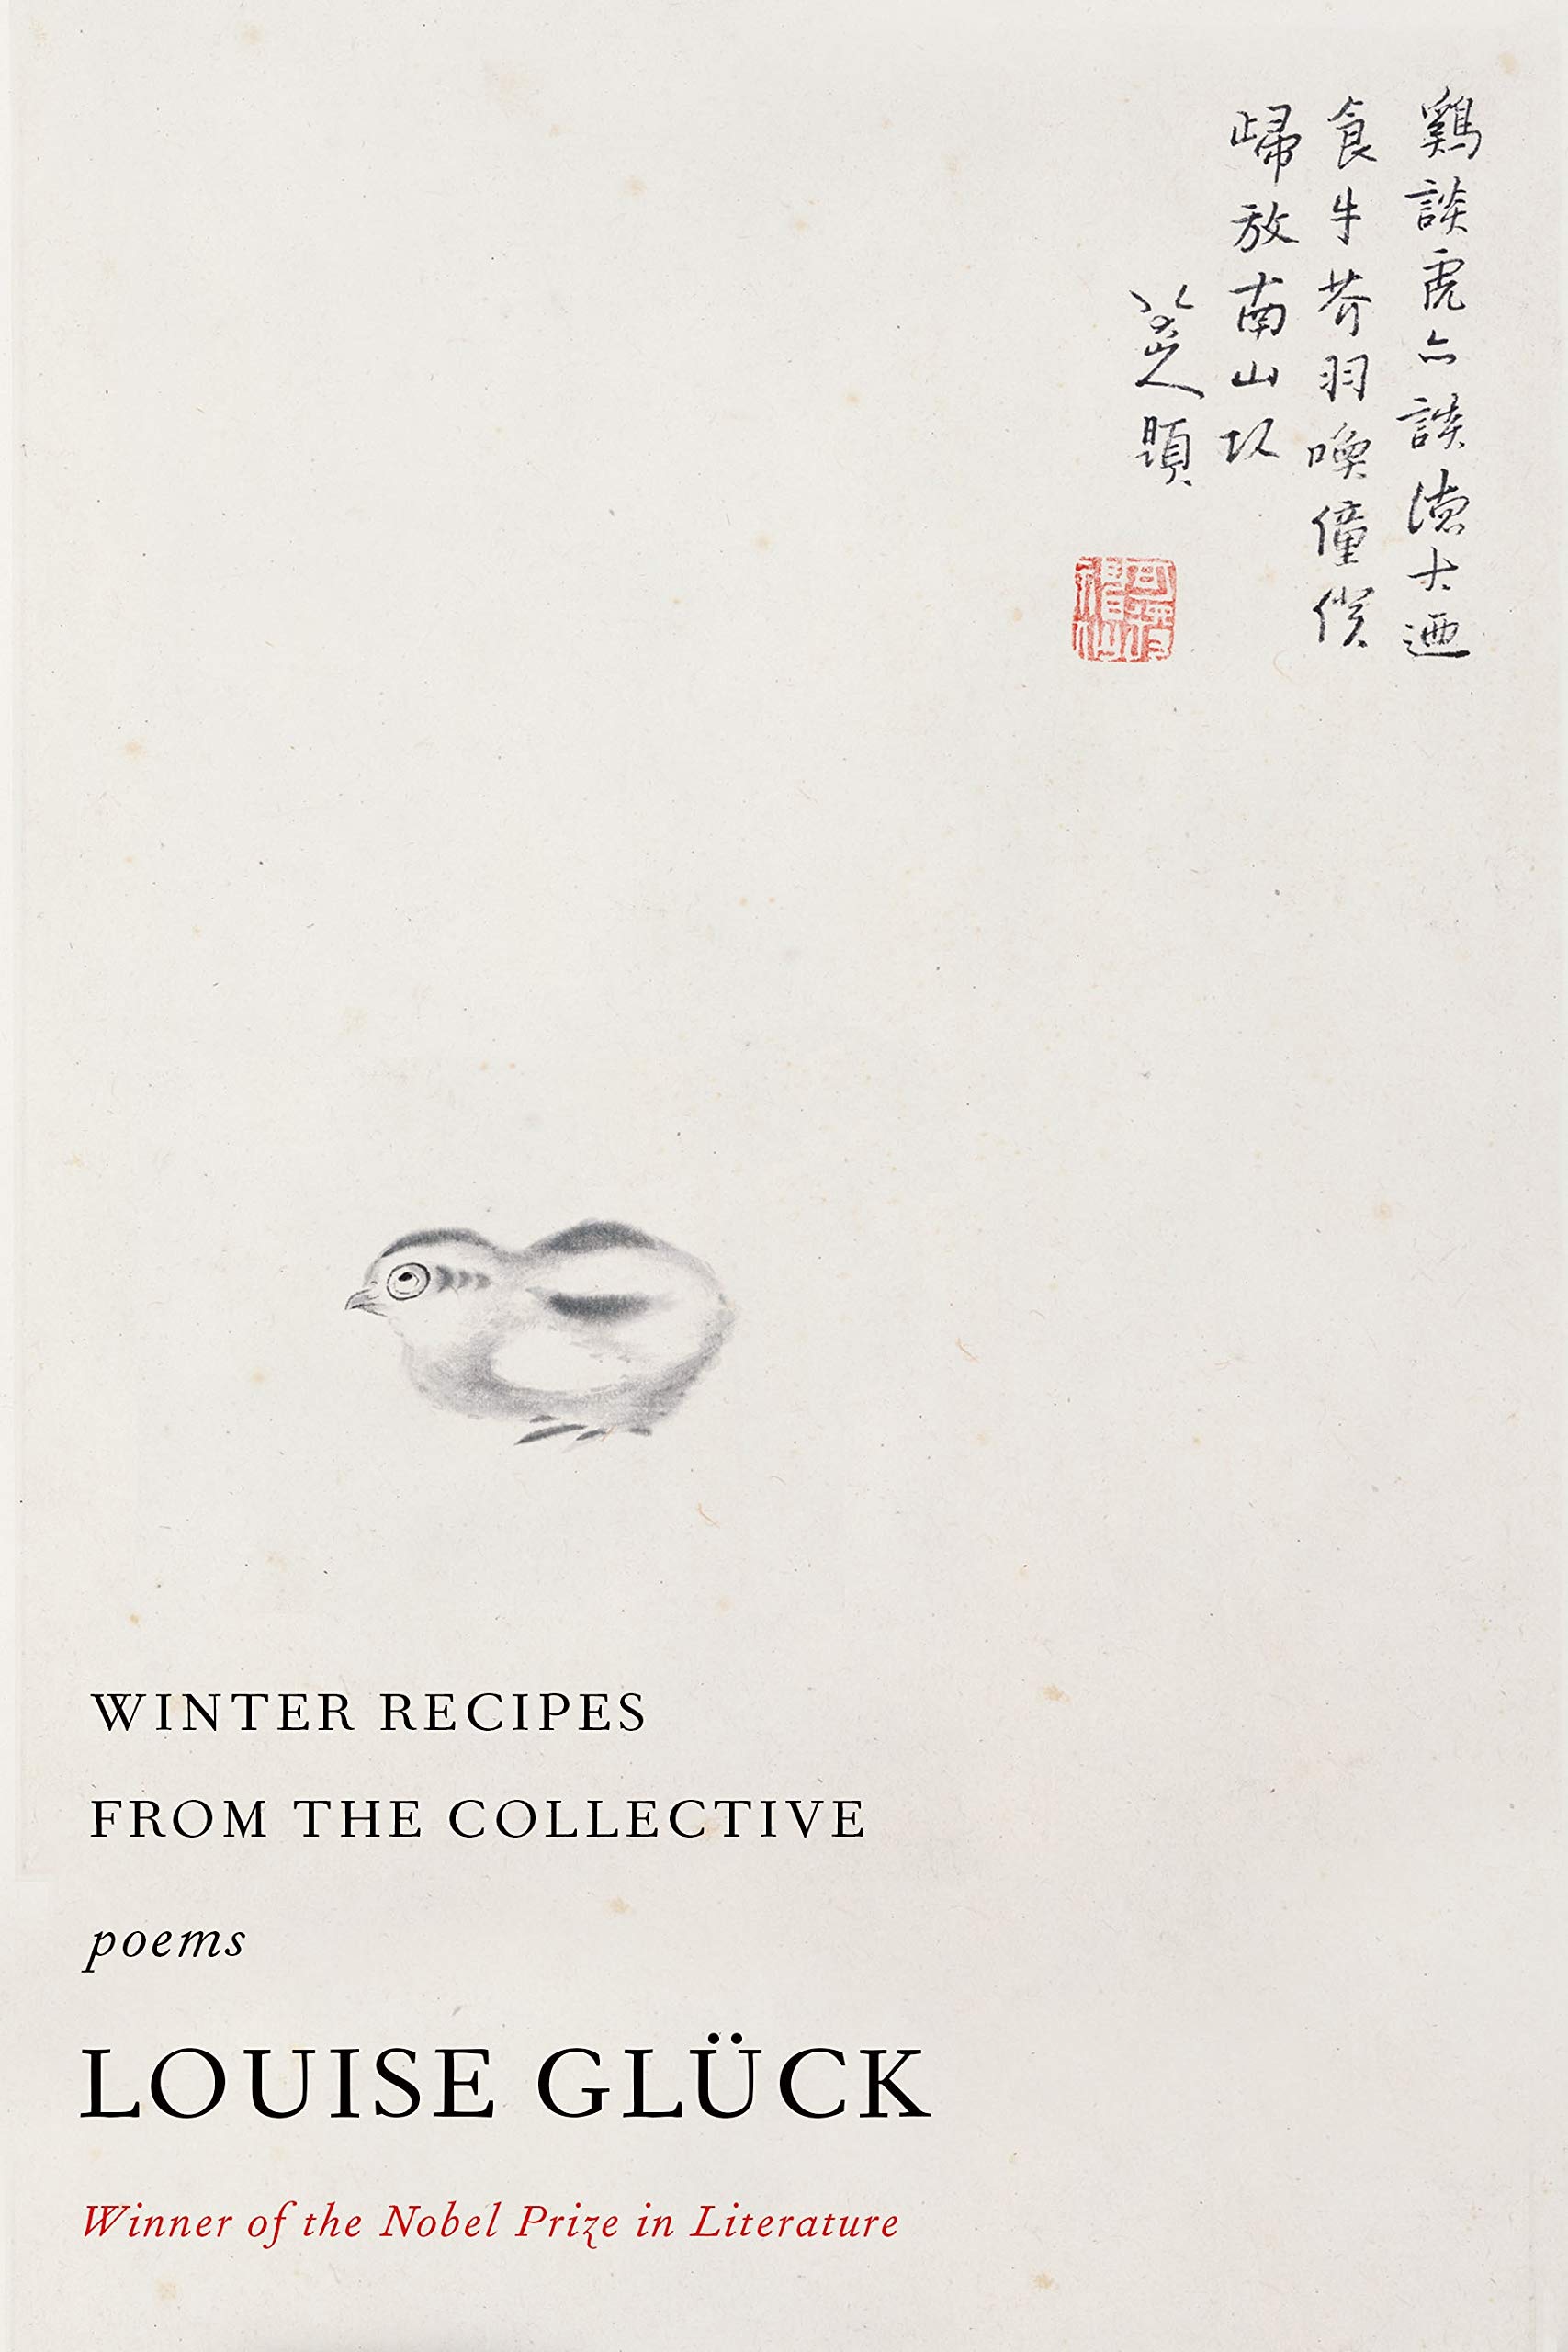 Image for "Winter Recipes from the Collective"